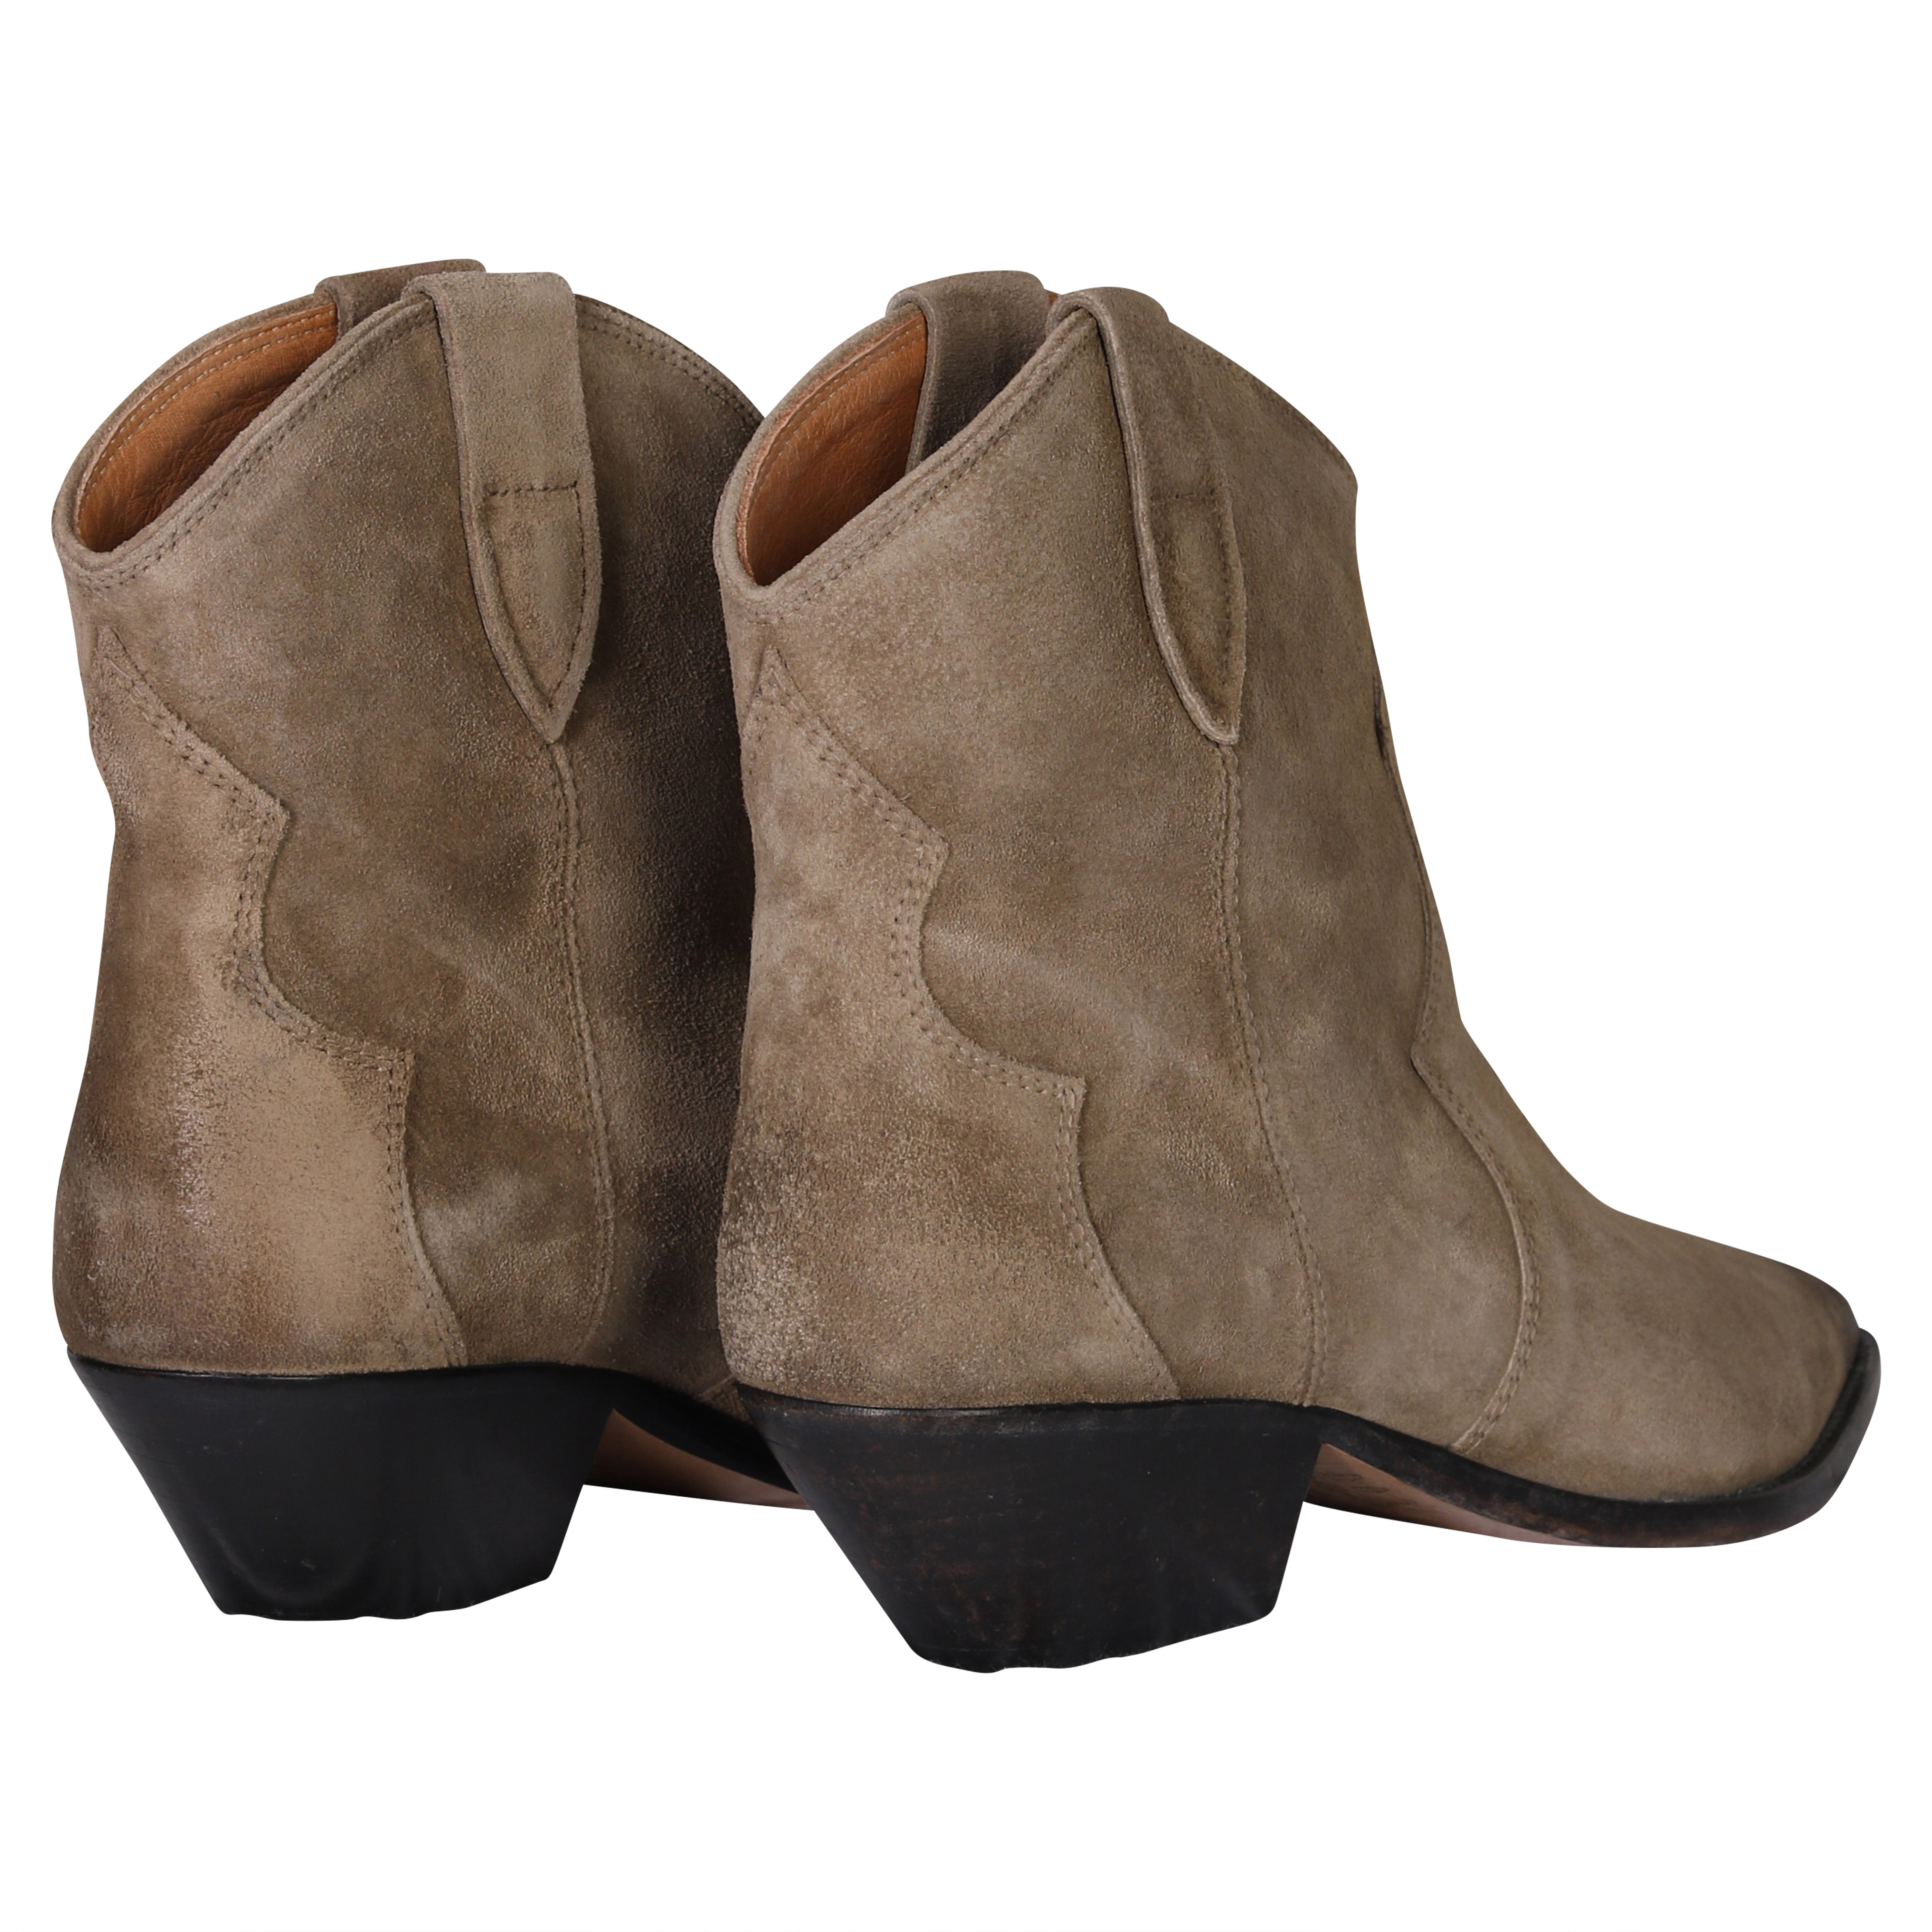 Isabel Marant Dewina Boots in Taupe 41